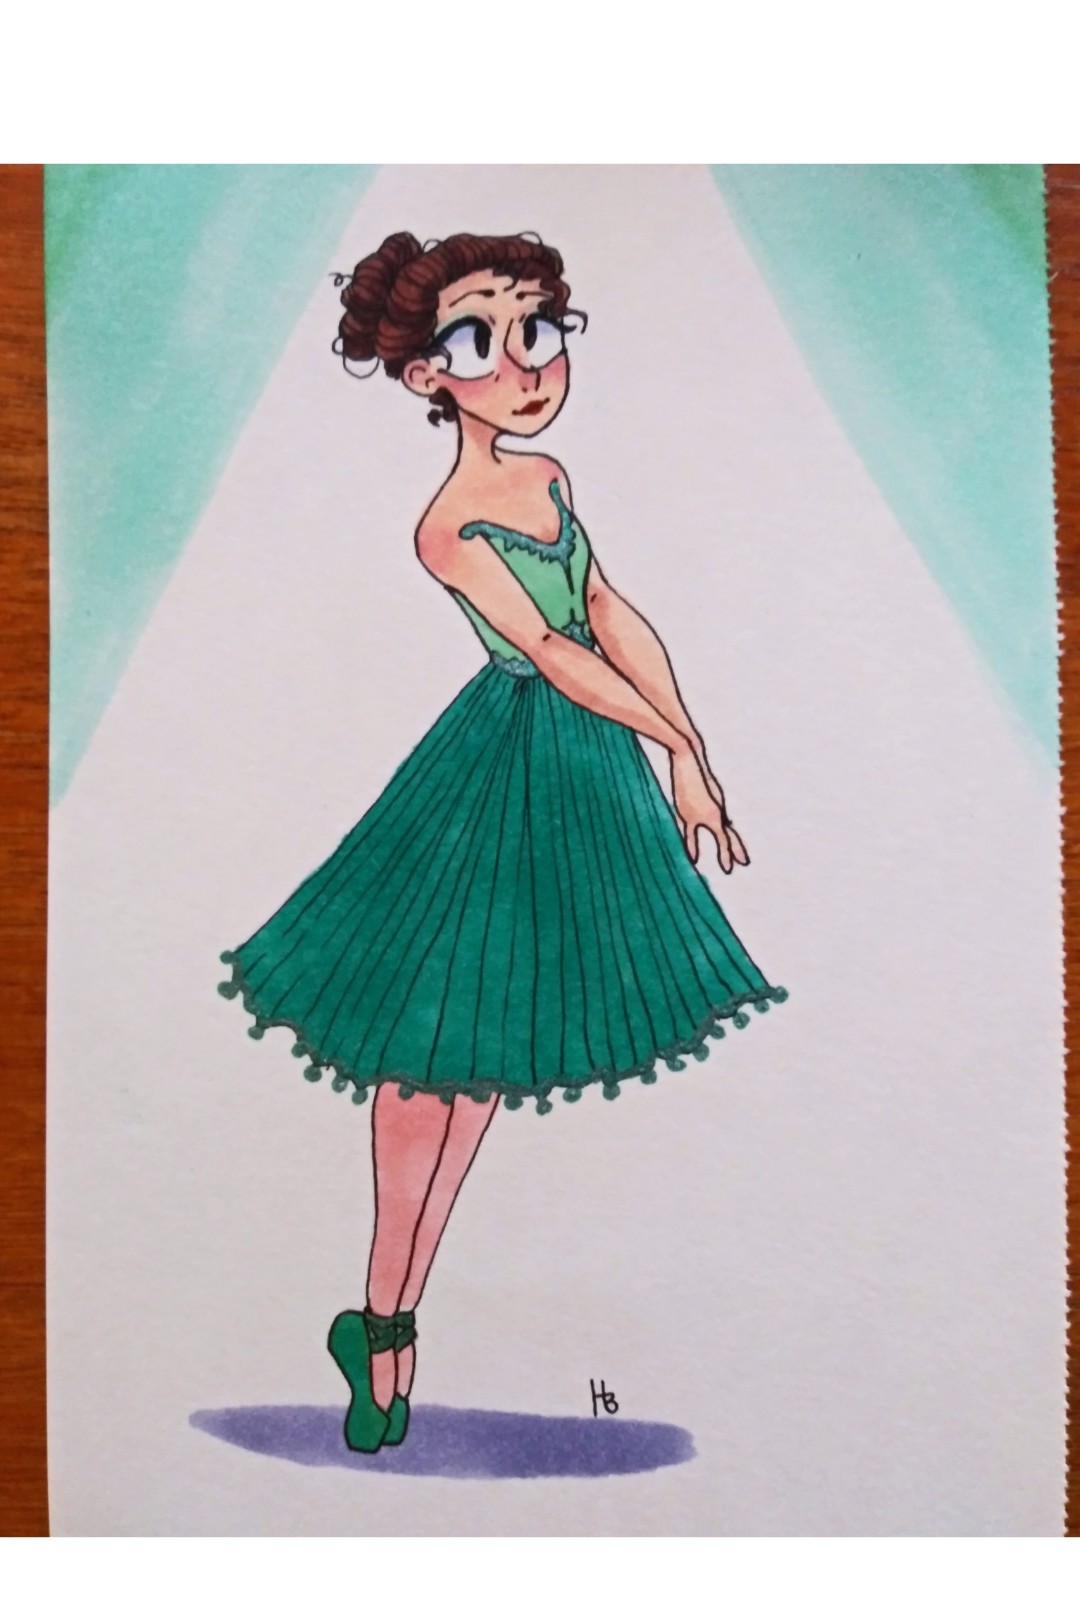 Drew this for my friend's birthday since she takes ballet classes with me!